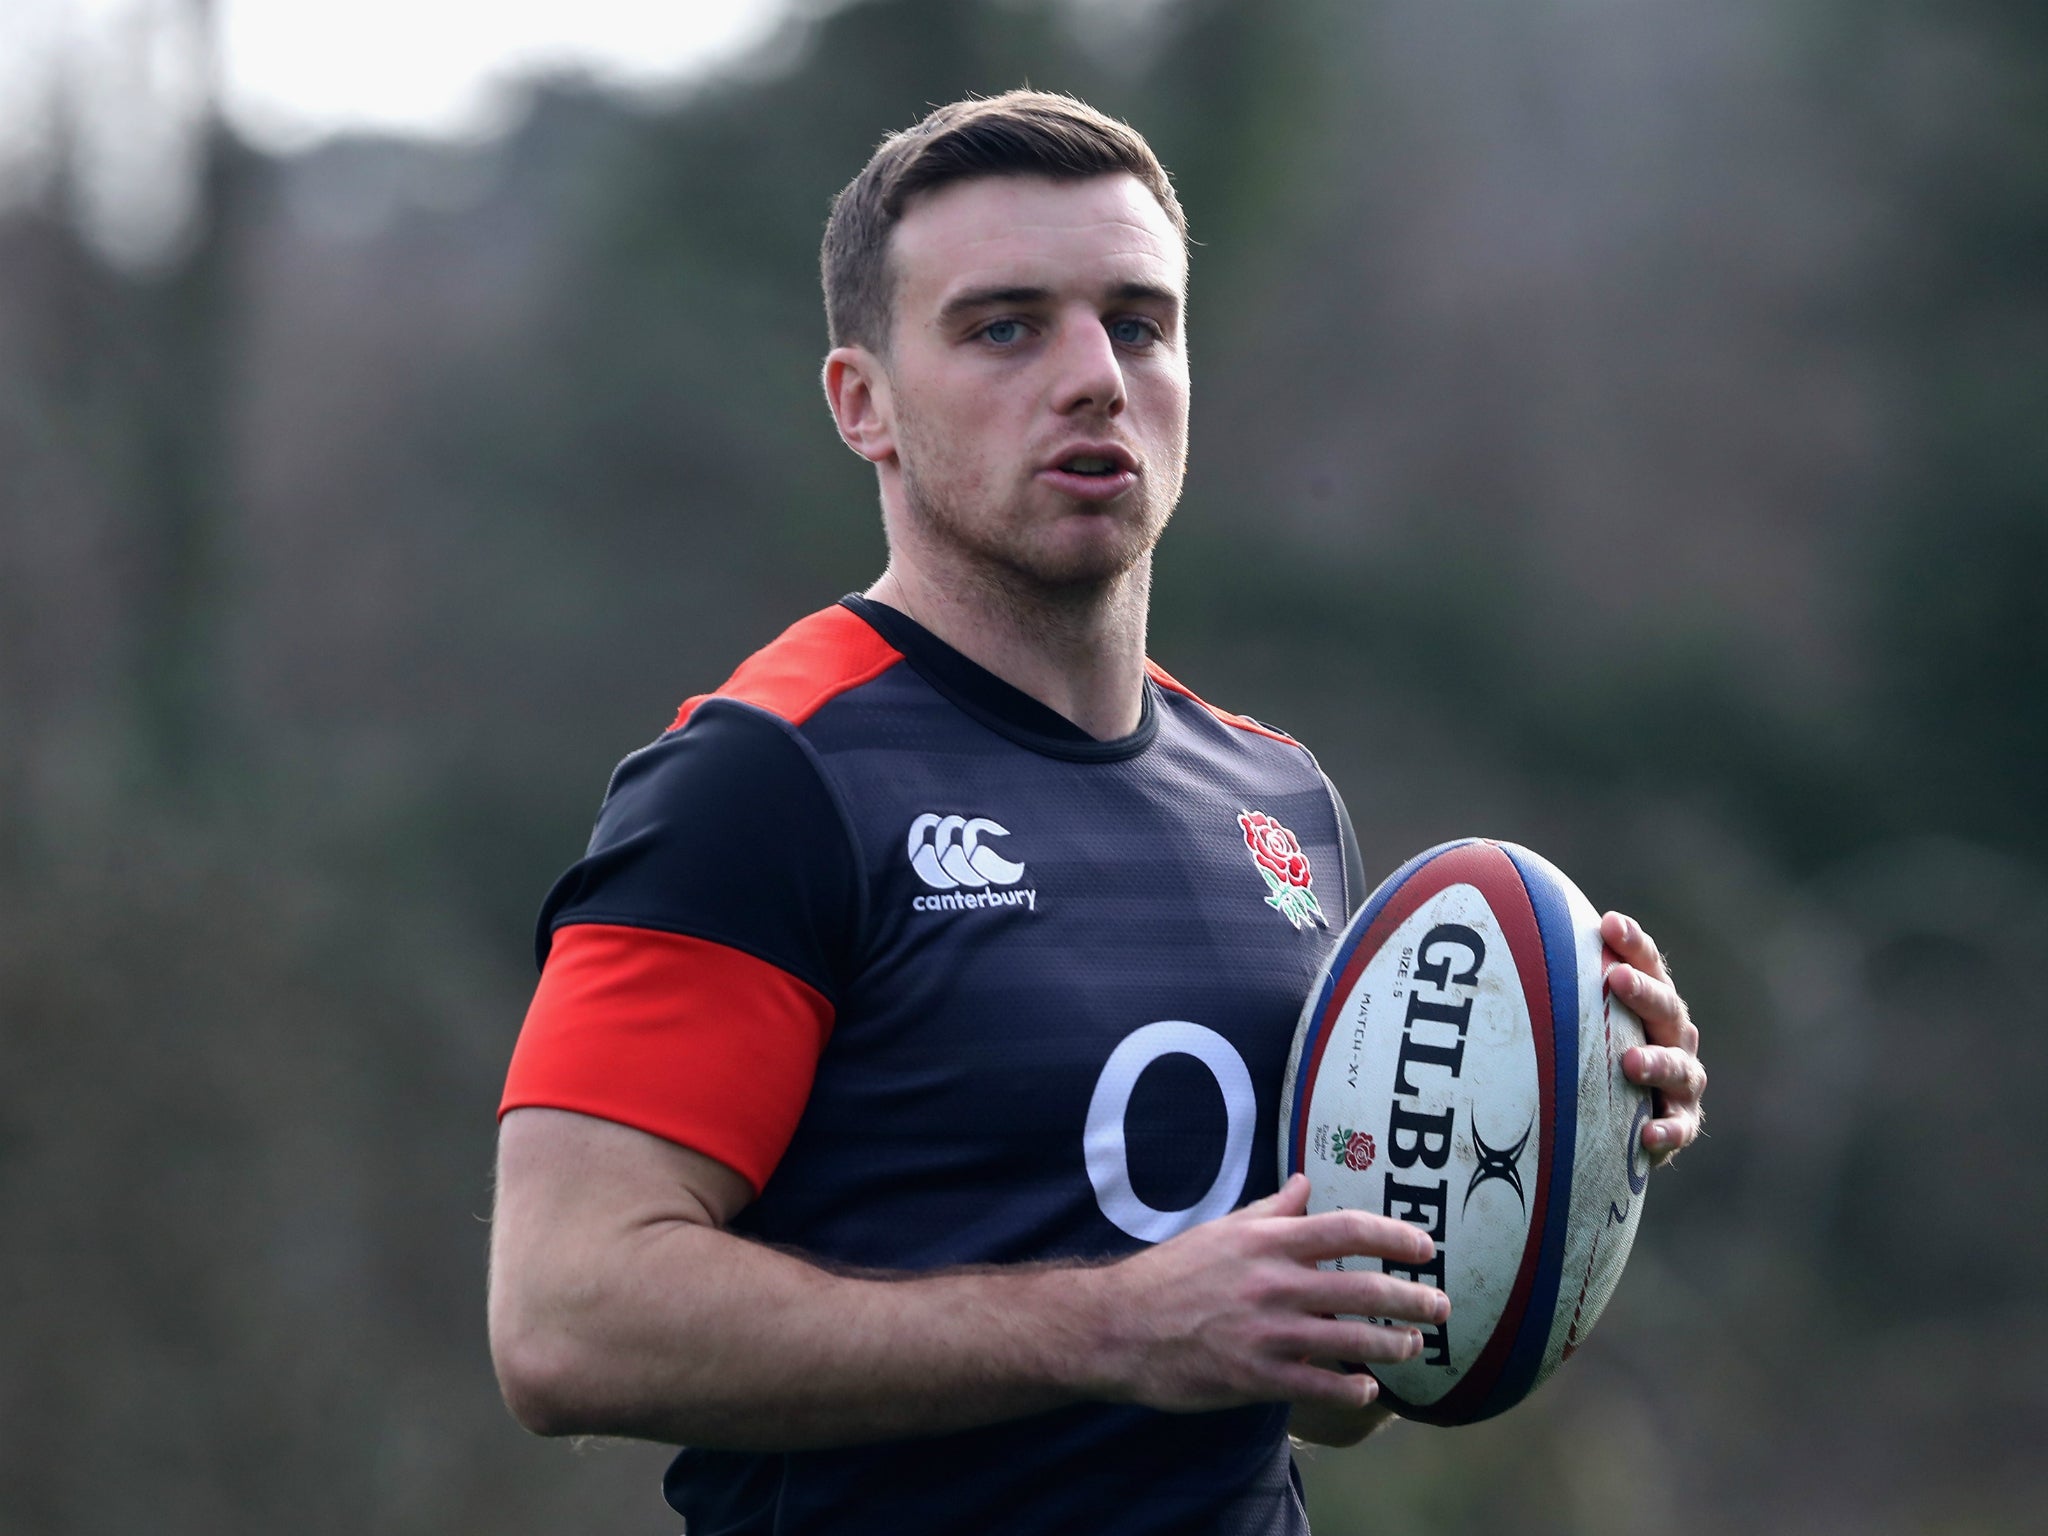 George Ford has been dropped for England's Six Nations clash with Ireland